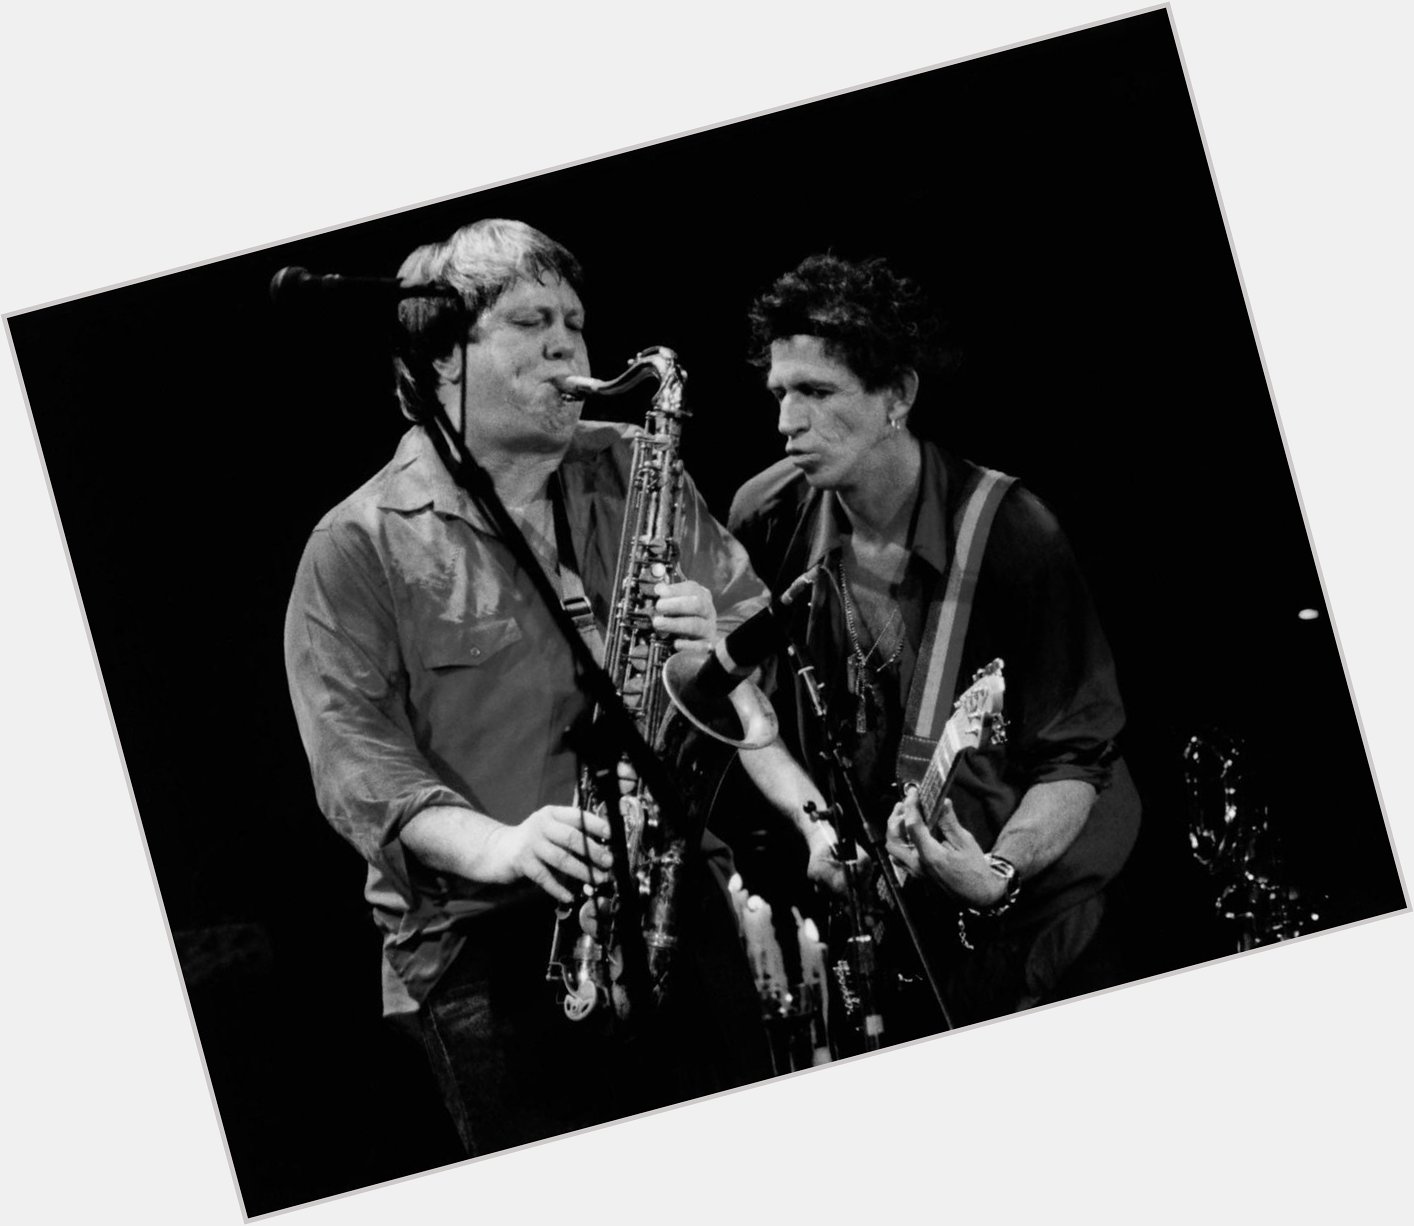 Happy Birthday to Keith Richards and Bobby Keys. They were both born on this day, in 1943 